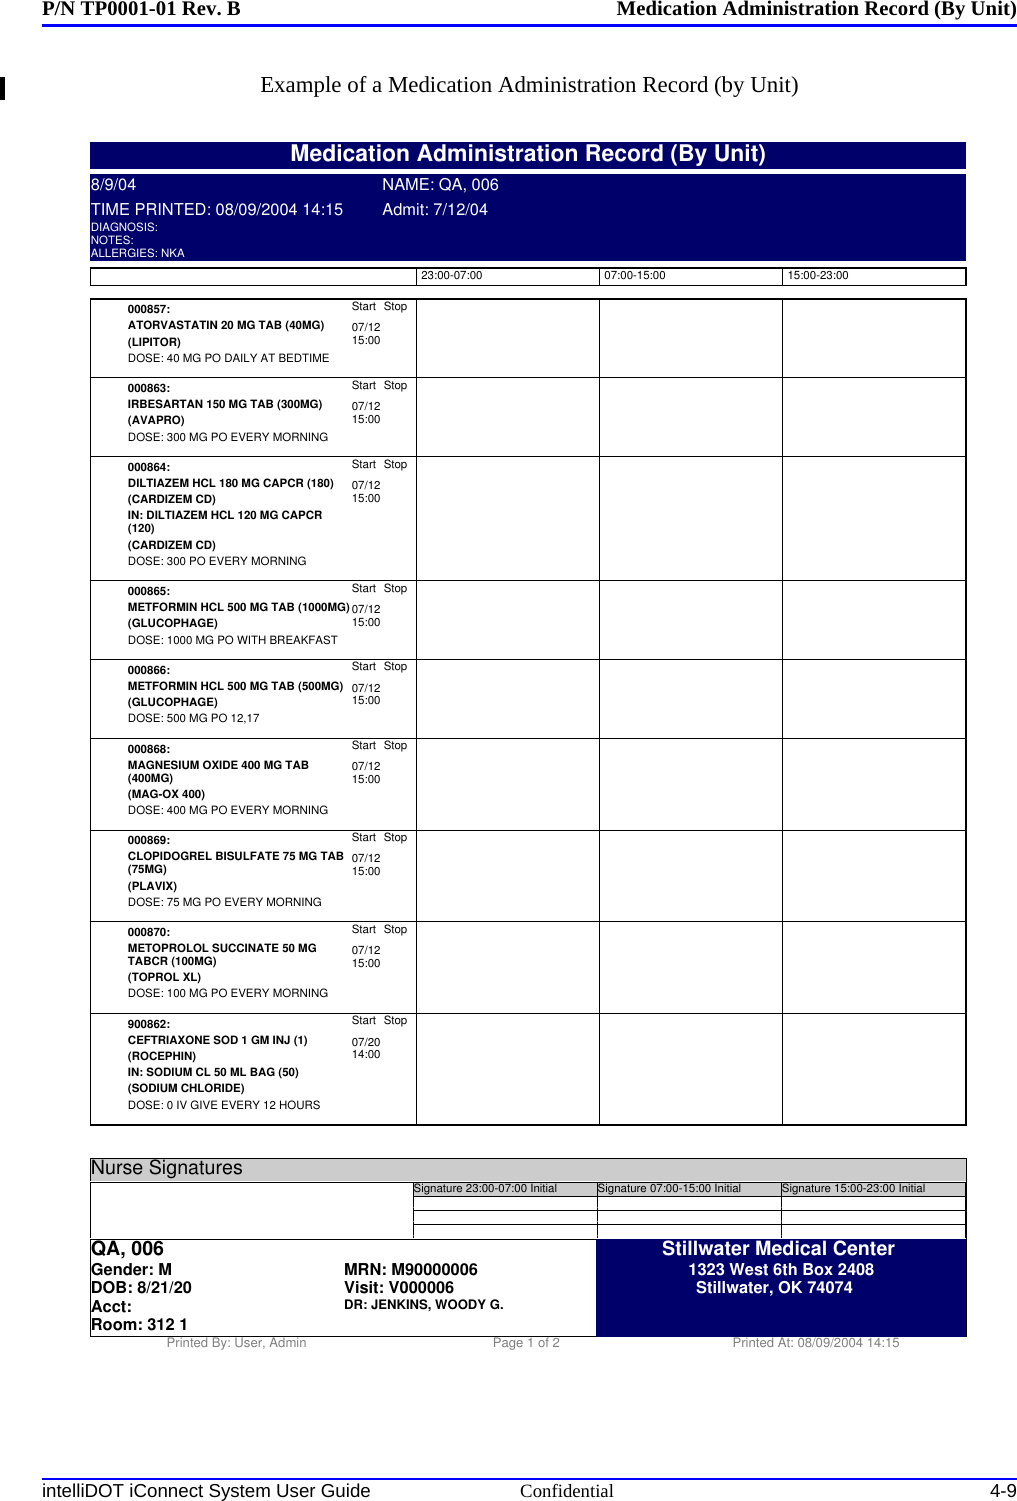 P/N TP0001-01 Rev. B Medication Administration Record (By Unit)intelliDOT iConnect System User Guide Confidential 4-9Example of a Medication Administration Record (by Unit)000857:ATORVASTATIN 20 MG TAB (40MG)(LIPITOR)Start07/1215:00StopDOSE: 40 MG PO DAILY AT BEDTIME000863:IRBESARTAN 150 MG TAB (300MG)(AVAPRO)Start07/1215:00StopDOSE: 300 MG PO EVERY MORNING000864:DILTIAZEM HCL 180 MG CAPCR (180)(CARDIZEM CD)IN: DILTIAZEM HCL 120 MG CAPCR(120)(CARDIZEM CD)Start07/1215:00StopDOSE: 300 PO EVERY MORNING000865:METFORMIN HCL 500 MG TAB (1000MG)(GLUCOPHAGE)Start07/1215:00StopDOSE: 1000 MG PO WITH BREAKFAST000866:METFORMIN HCL 500 MG TAB (500MG)(GLUCOPHAGE)Start07/1215:00StopDOSE: 500 MG PO 12,17000868:MAGNESIUM OXIDE 400 MG TAB(400MG)(MAG-OX 400)Start07/1215:00StopDOSE: 400 MG PO EVERY MORNING000869:CLOPIDOGREL BISULFATE 75 MG TAB(75MG)(PLAVIX)Start07/1215:00StopDOSE: 75 MG PO EVERY MORNING000870:METOPROLOL SUCCINATE 50 MGTABCR (100MG)(TOPROL XL)Start07/1215:00StopDOSE: 100 MG PO EVERY MORNING900862:CEFTRIAXONE SOD 1 GM INJ (1)(ROCEPHIN)IN: SODIUM CL 50 ML BAG (50)(SODIUM CHLORIDE)Start07/2014:00StopDOSE: 0 IV GIVE EVERY 12 HOURSMedication Administration Record (By Unit)8/9/04 NAME: QA, 006TIME PRINTED: 08/09/2004 14:15 Admit: 7/12/04DIAGNOSIS:NOTES:ALLERGIES: NKA23:00-07:00 07:00-15:00 15:00-23:00Nurse SignaturesSignature 23:00-07:00 Initial___Signature 07:00-15:00 Initial___Signature 15:00-23:00 Initial___QA, 006Gender: MDOB: 8/21/20 MRN: M90000006Visit: V000006Acct: DR: JENKINS, WOODY G.Room: 312 1Stillwater Medical Center1323 West 6th Box 2408Stillwater, OK 74074Printed By: User, Admin Page 1 of 2 Printed At: 08/09/2004 14:15